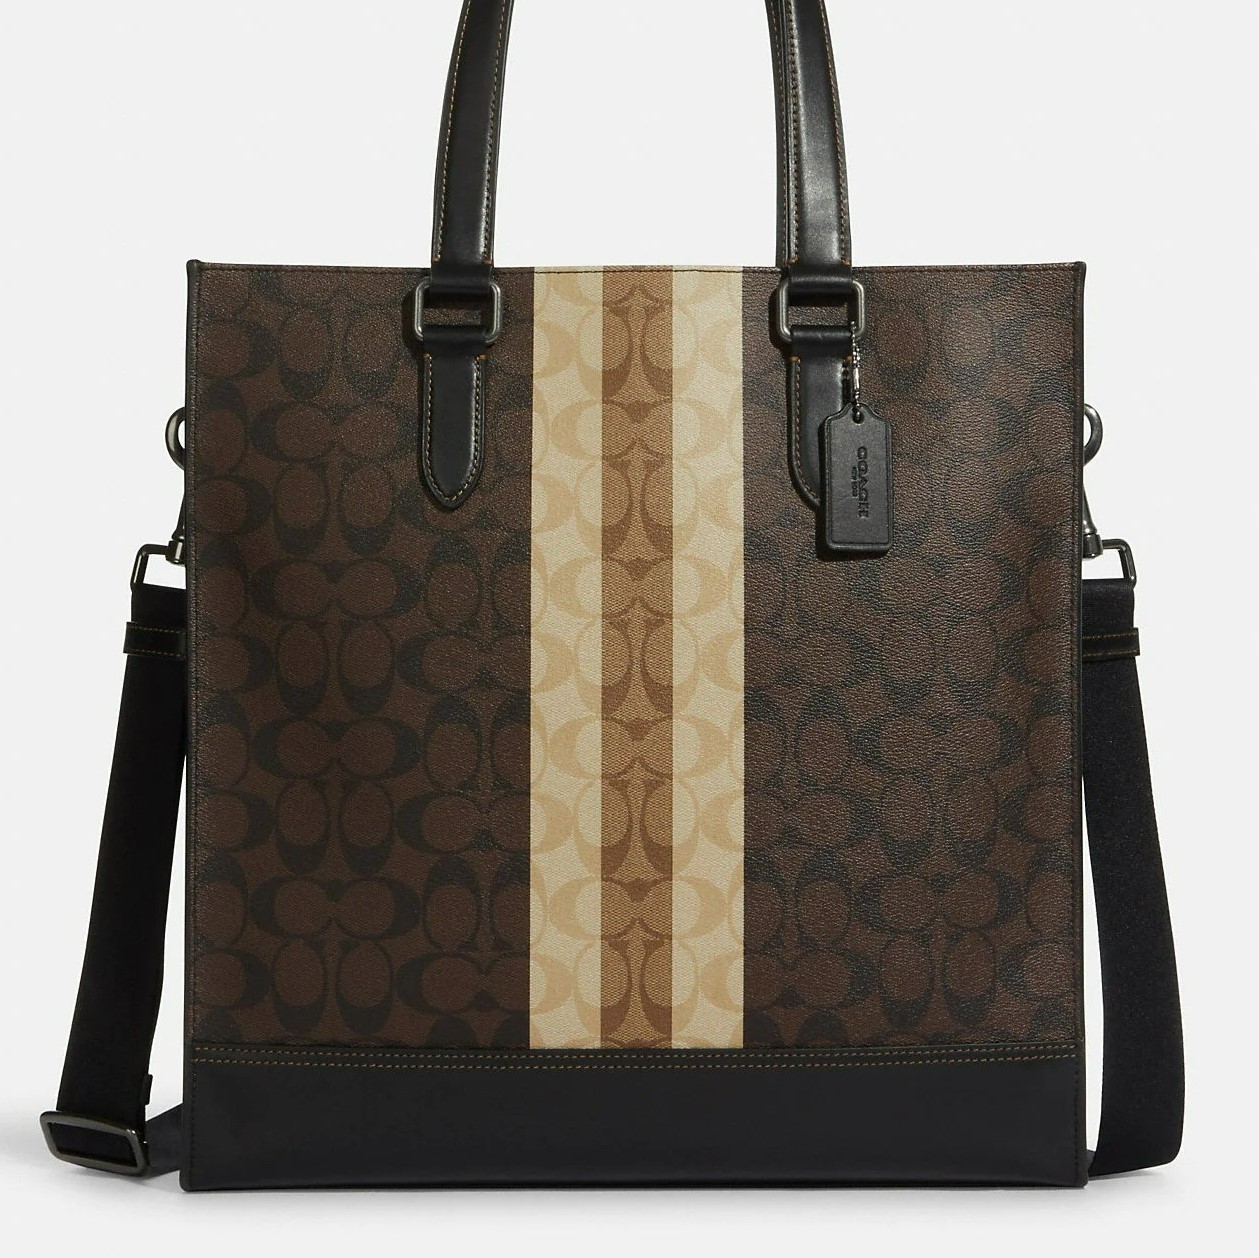 TÚI XÁCH COACH GRAHAM STRUCTURED TOTE IN BLOCKED SIGNATURE CANVAS WITH VARSITY STRIPE 10